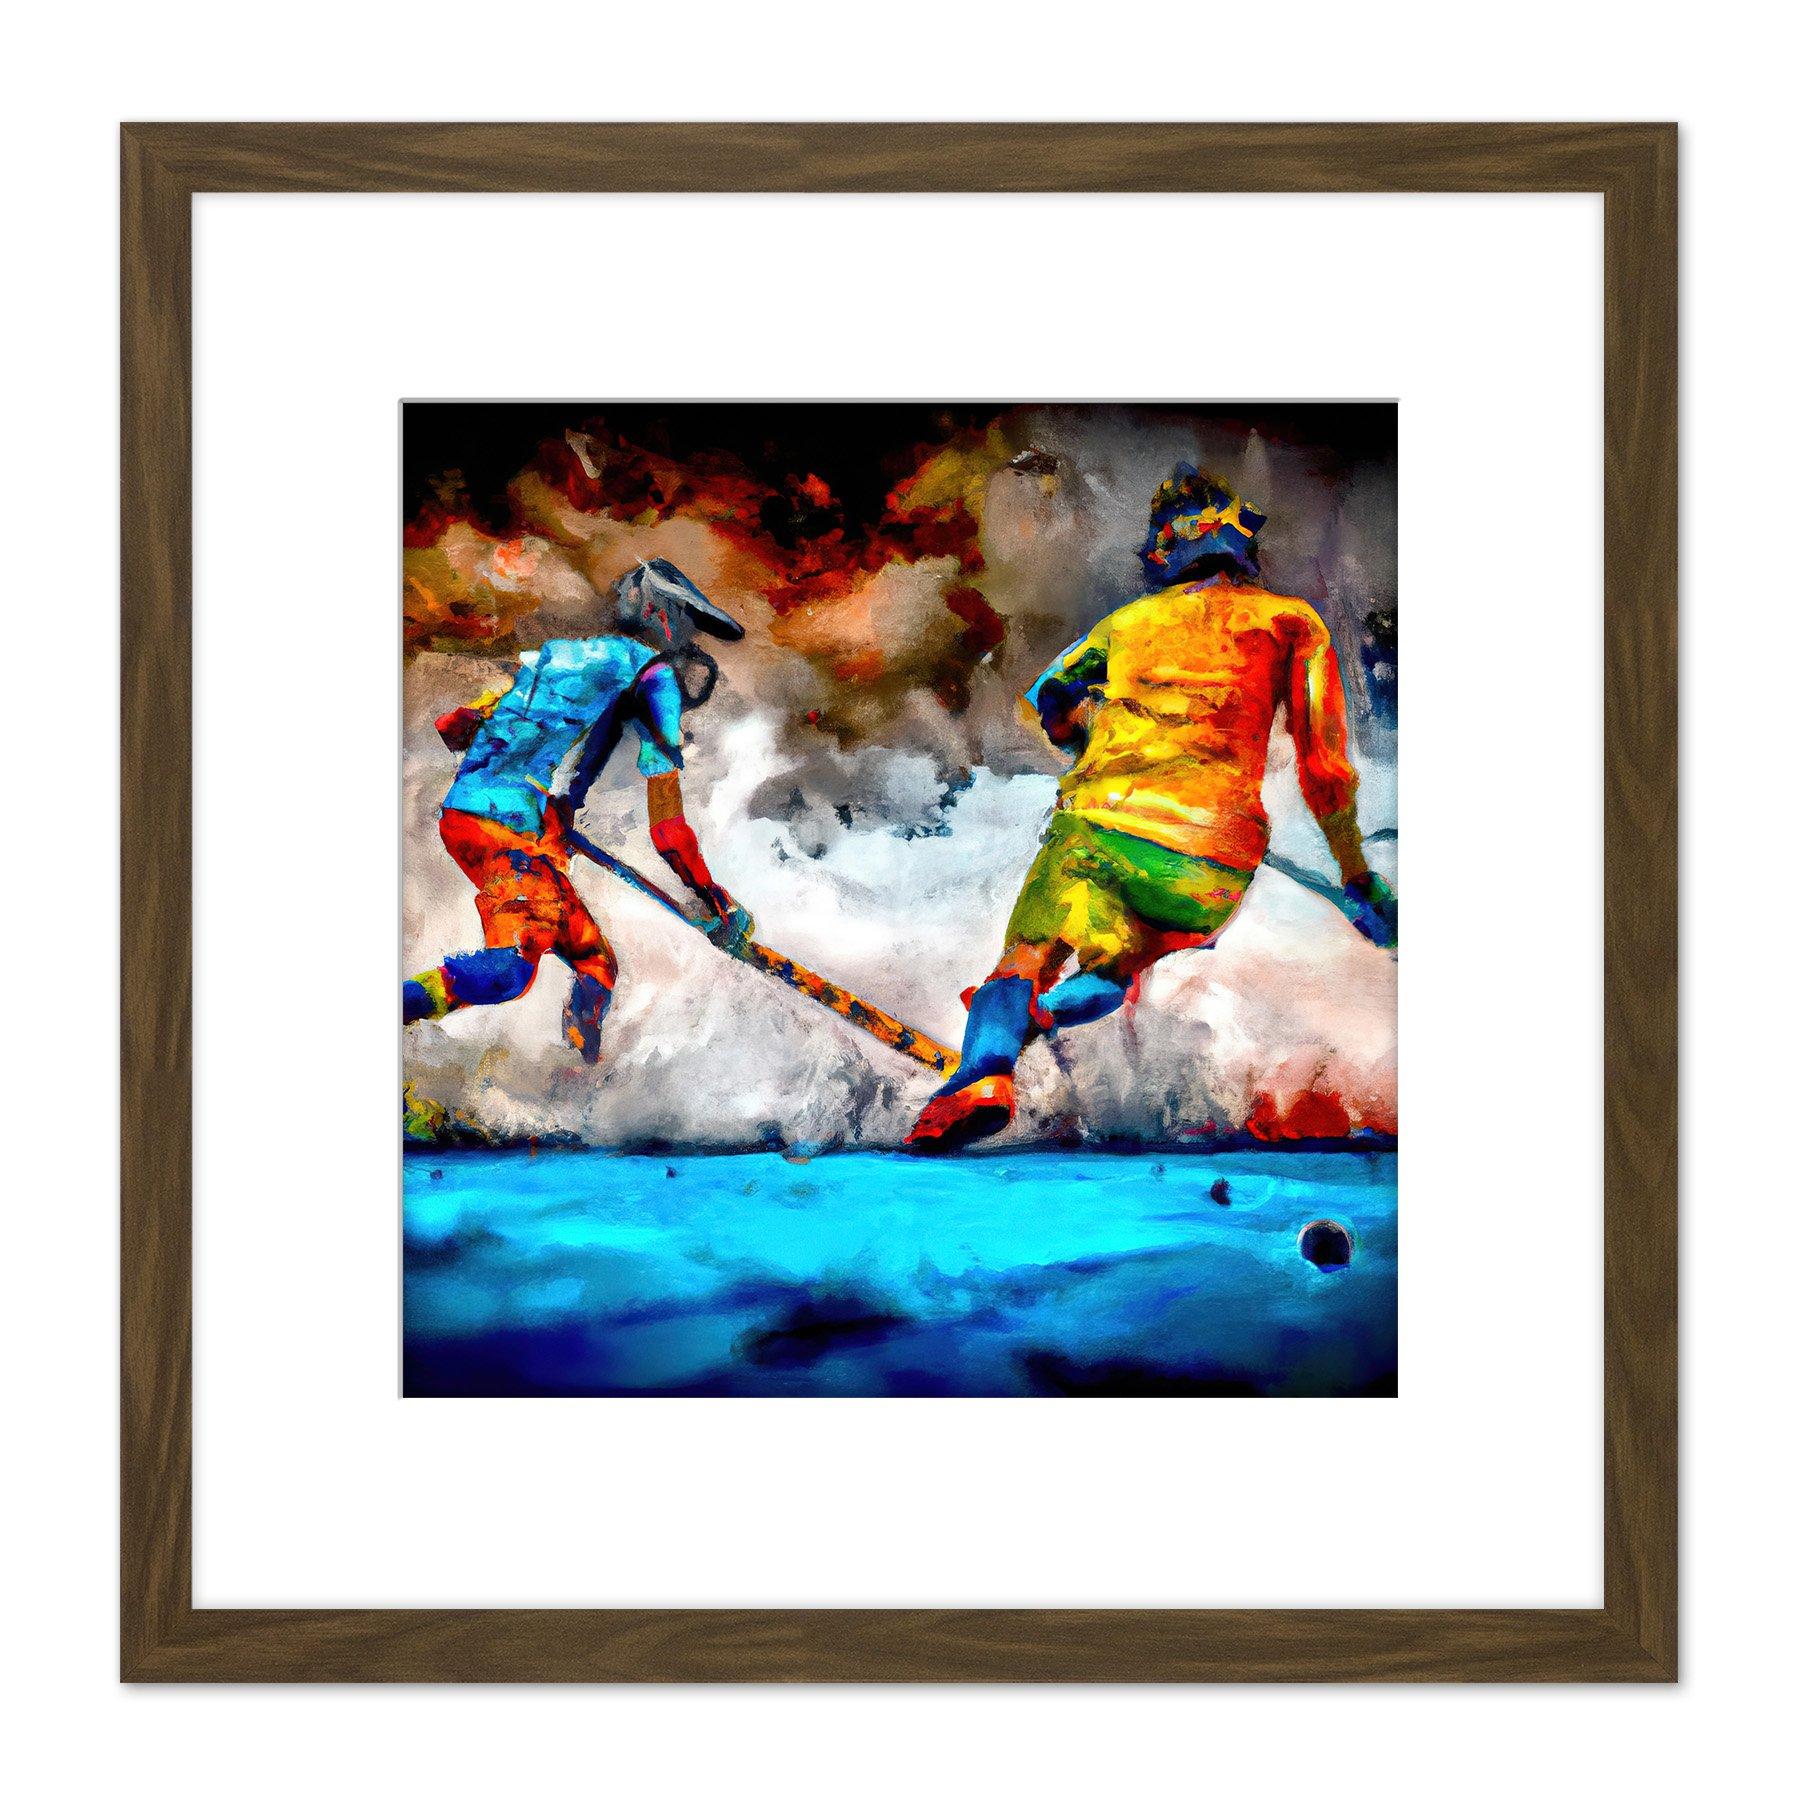 Field Hockey Players Action Abstract Oil Painting Square Wooden Framed Wall Art Print Picture 8X8 Inch